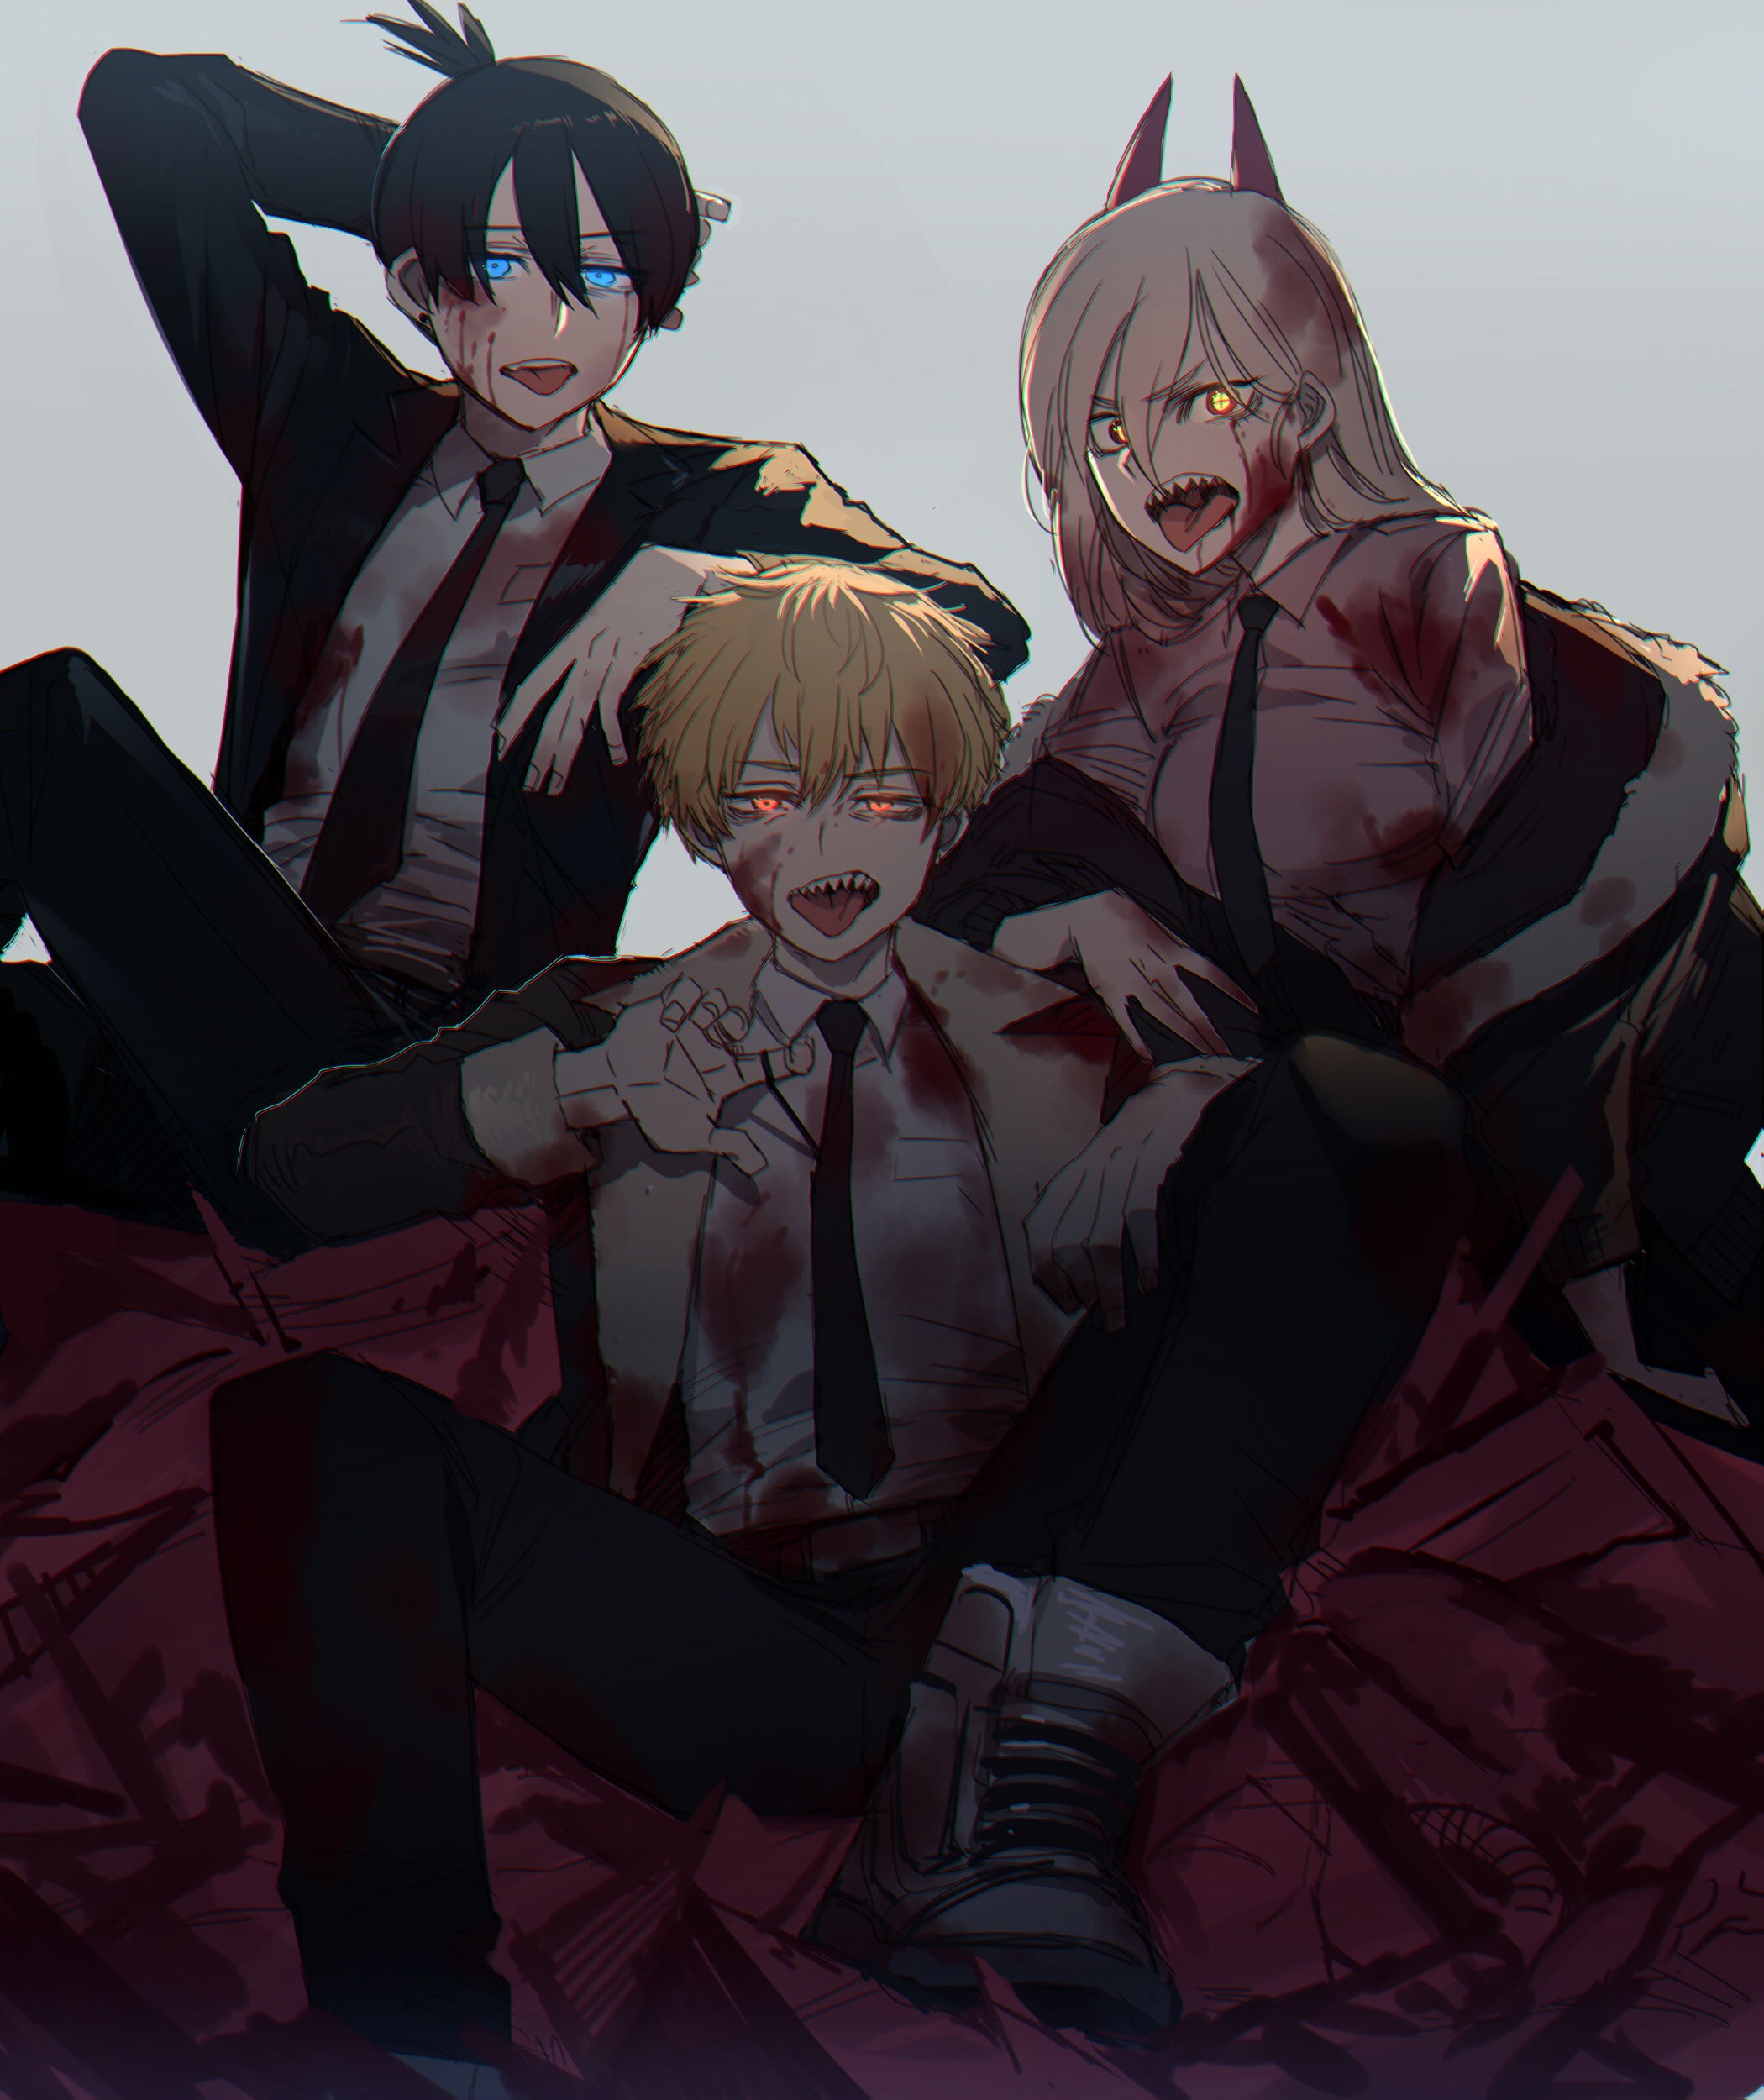 Chainsaw Man  Chainsaw, Anime, Girls in suits